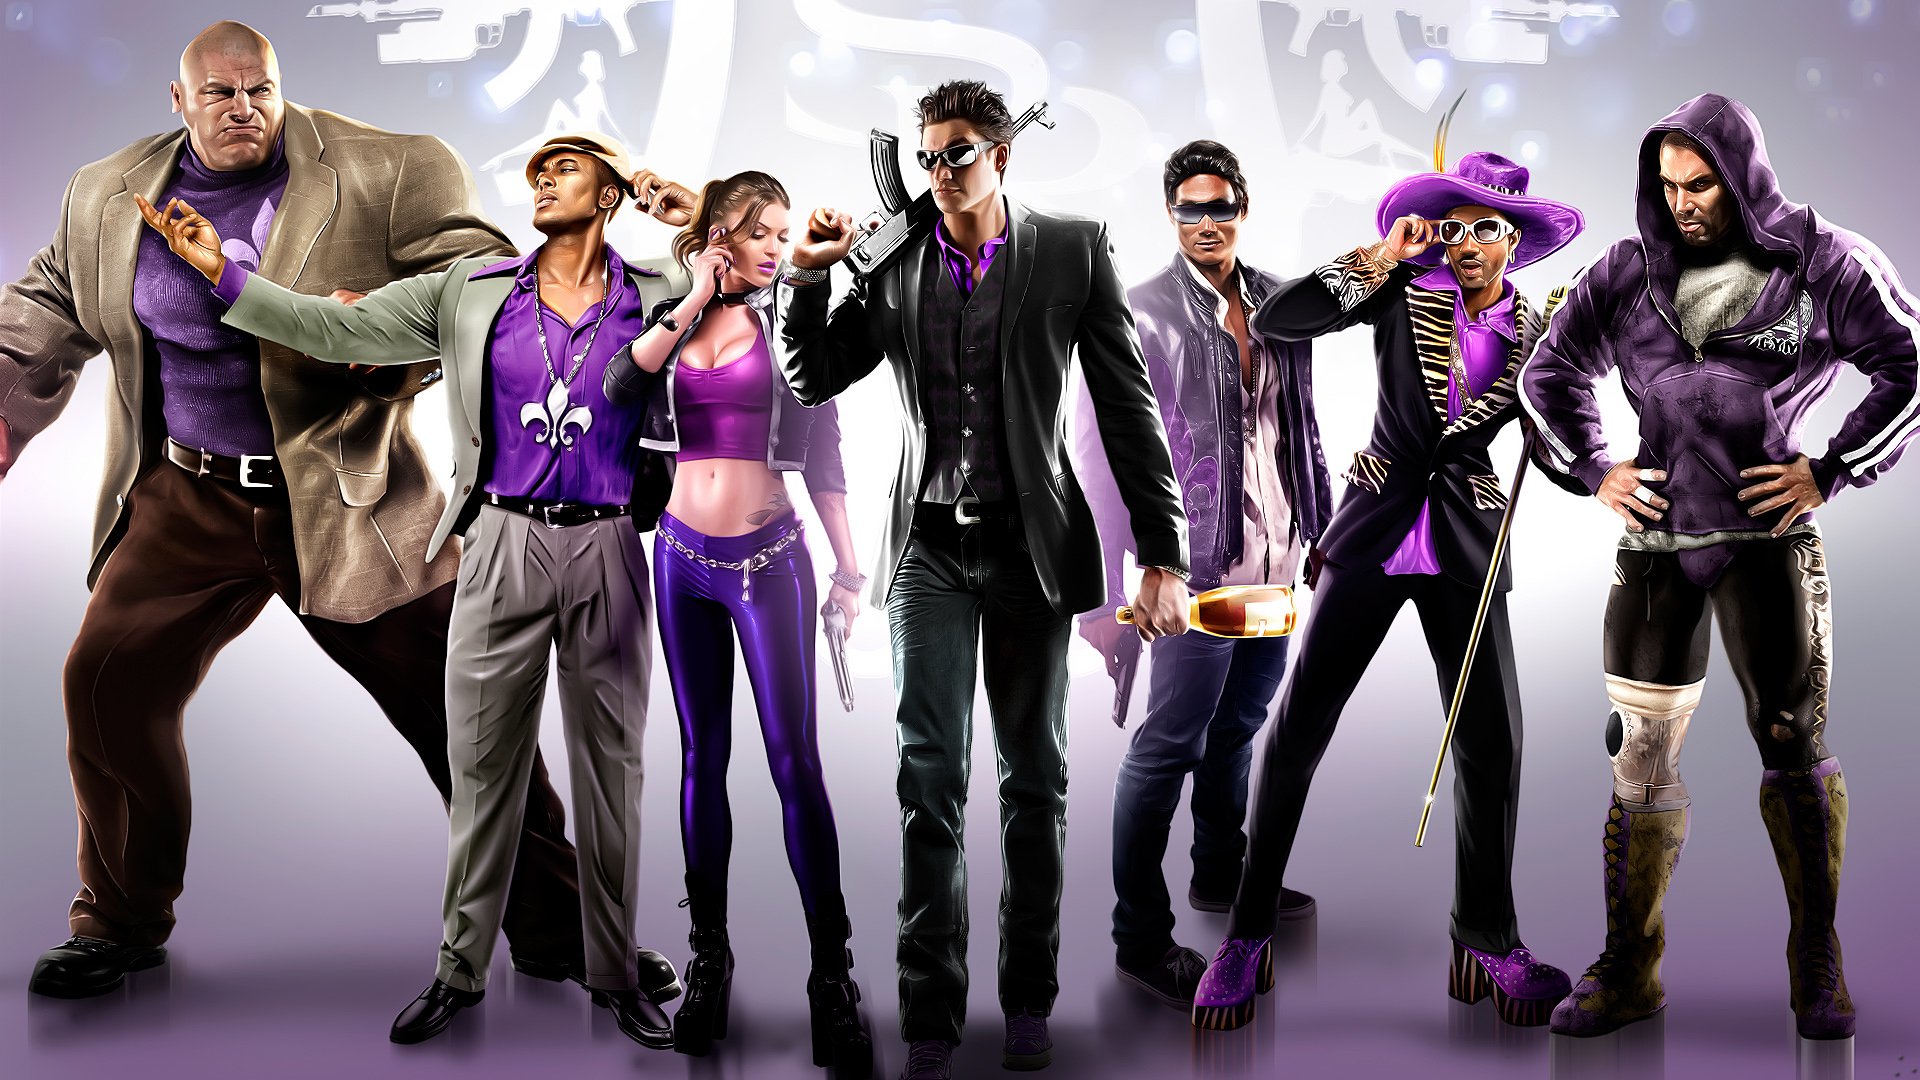 Saints row hd papers and backgrounds